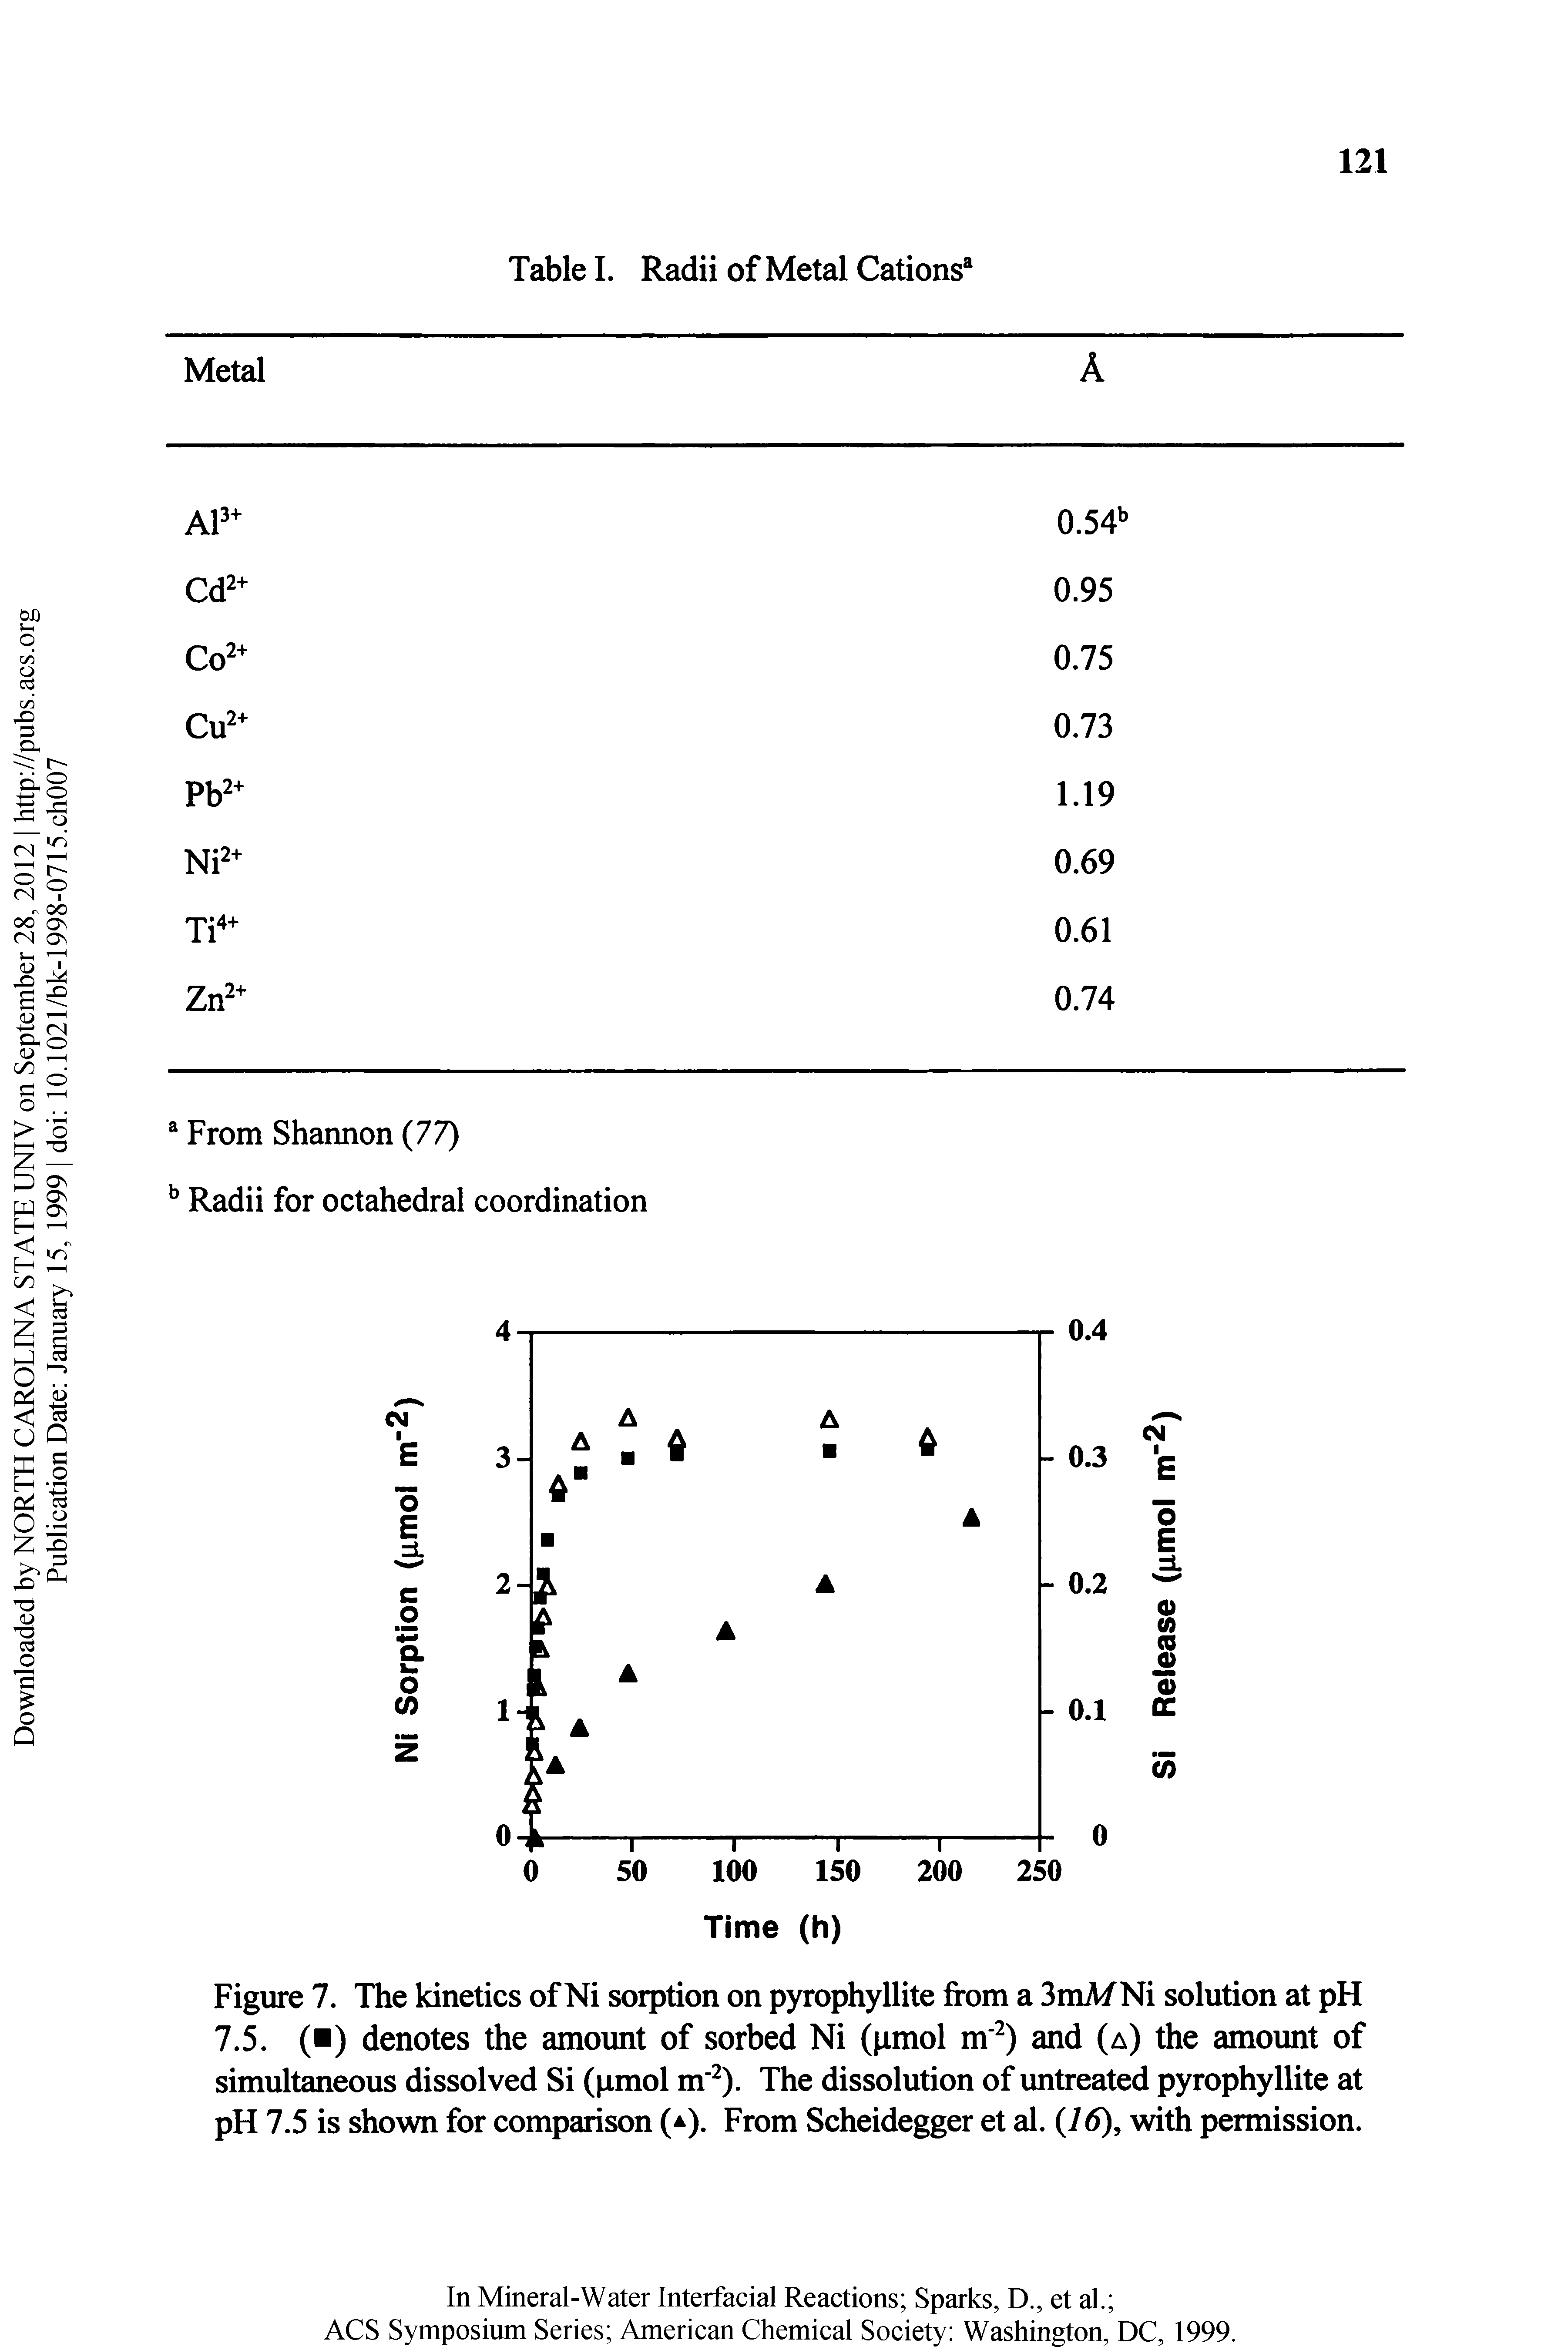 Figure 7. The kinetics of Ni sorption on pyrophyllite from a 3mMNi solution at pH 7.5. ( ) denotes the amount of sorbed Ni (pmol m ) and (a) the amount of simultaneous dissolved Si (pmol m ). The dissolution of untreated pyrophyllite at pH 7.5 is shown for comparison ( ). From Scheidegger et 2il. (16), with permission.